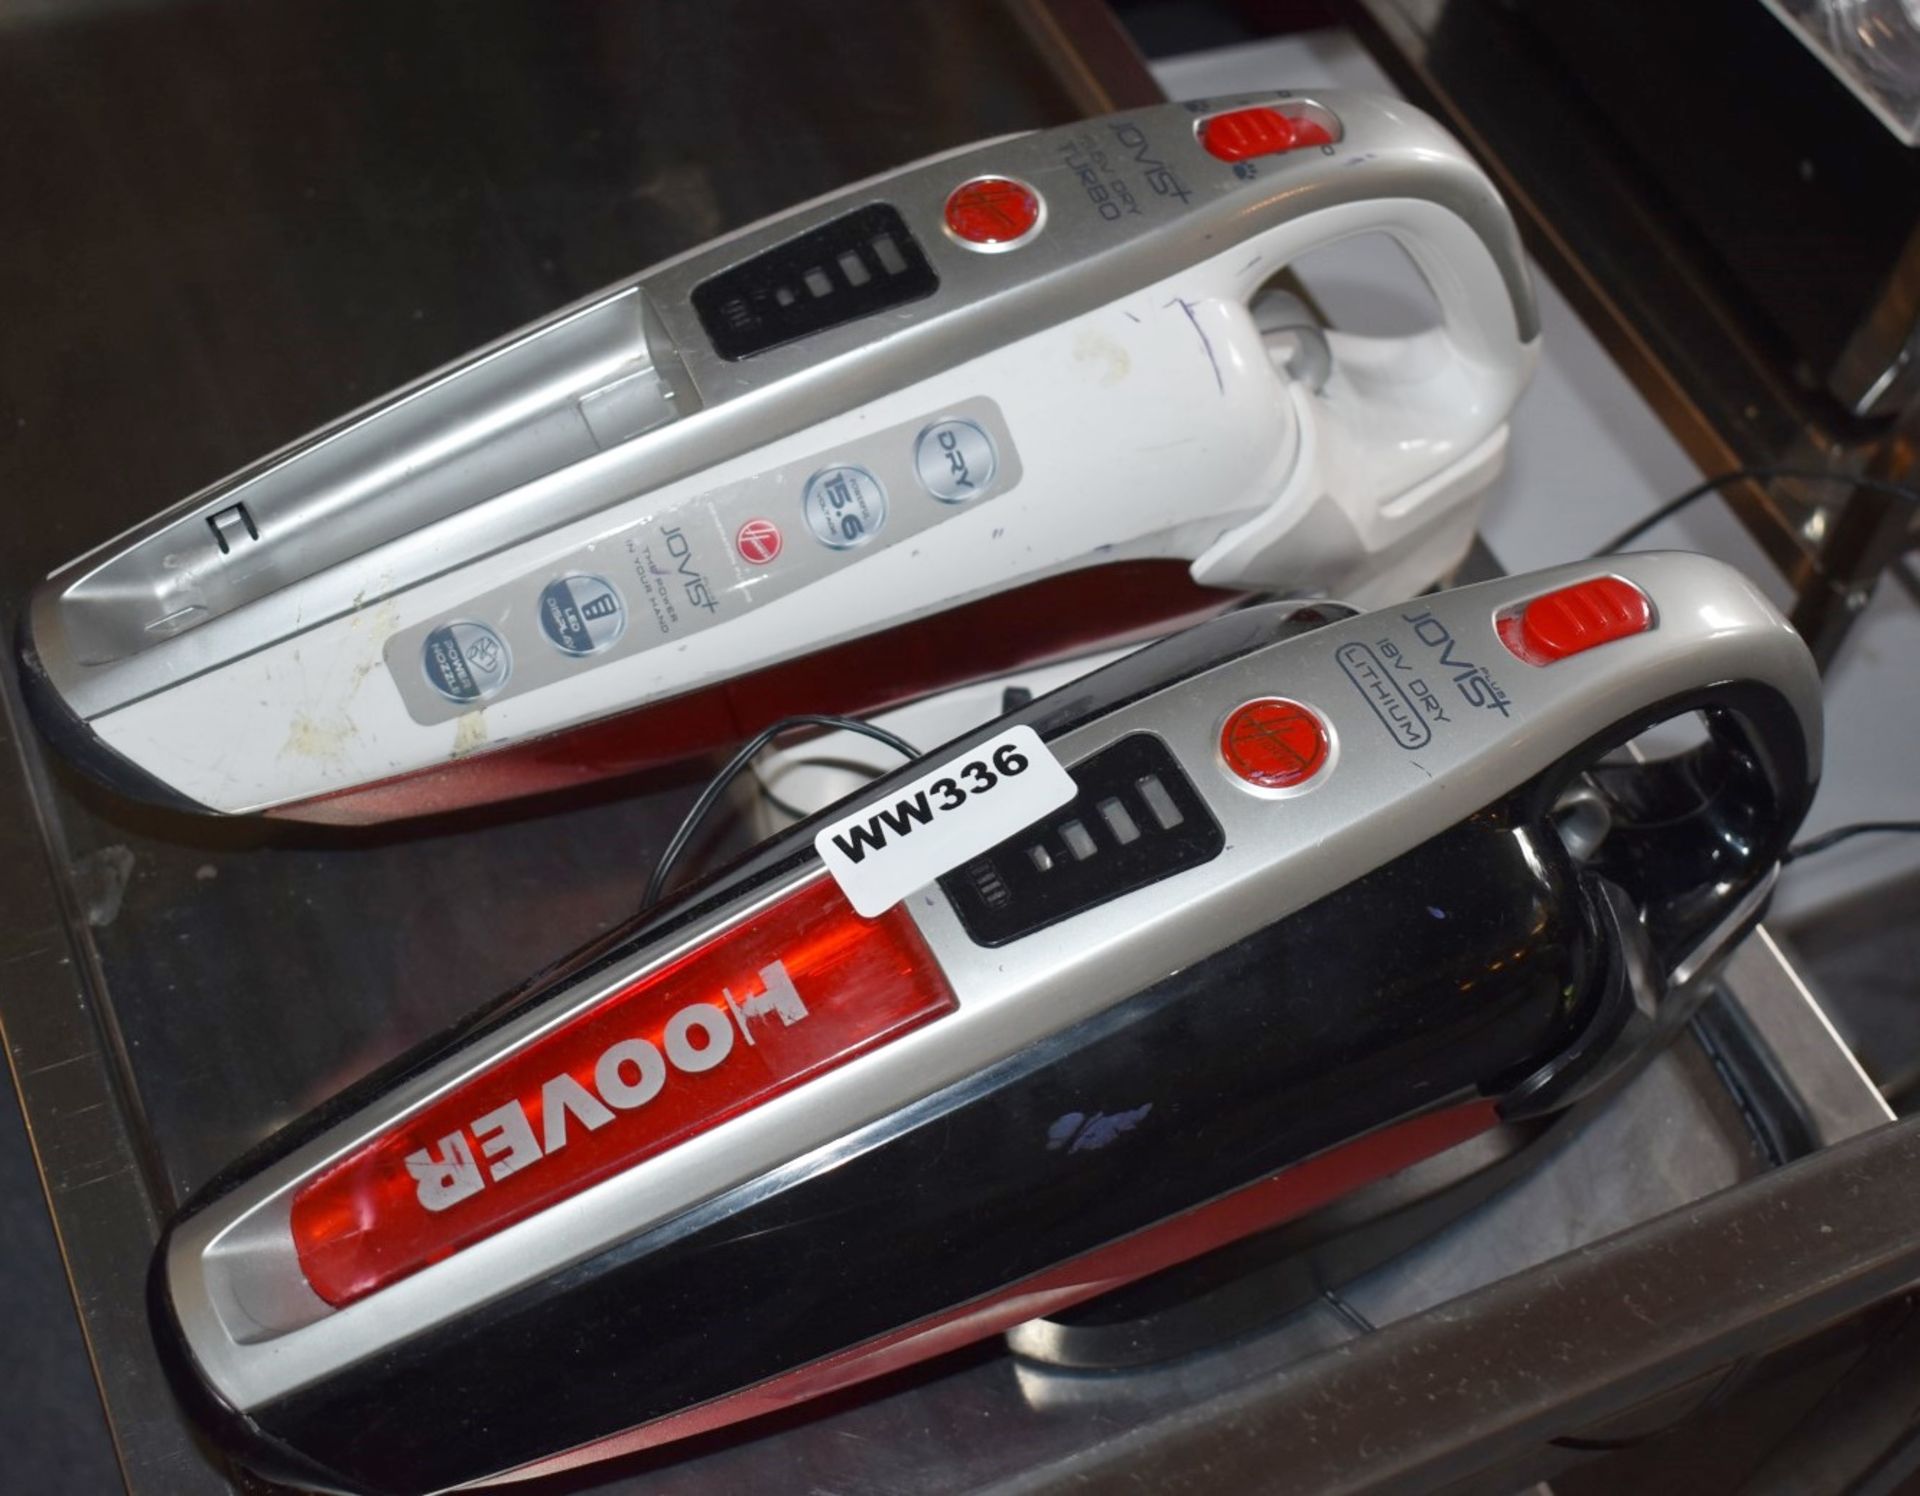 2 x Hoover Handheld Vacuum Cleaners With Chargers - Ref WW336 - CL520 - Location: London W10 More